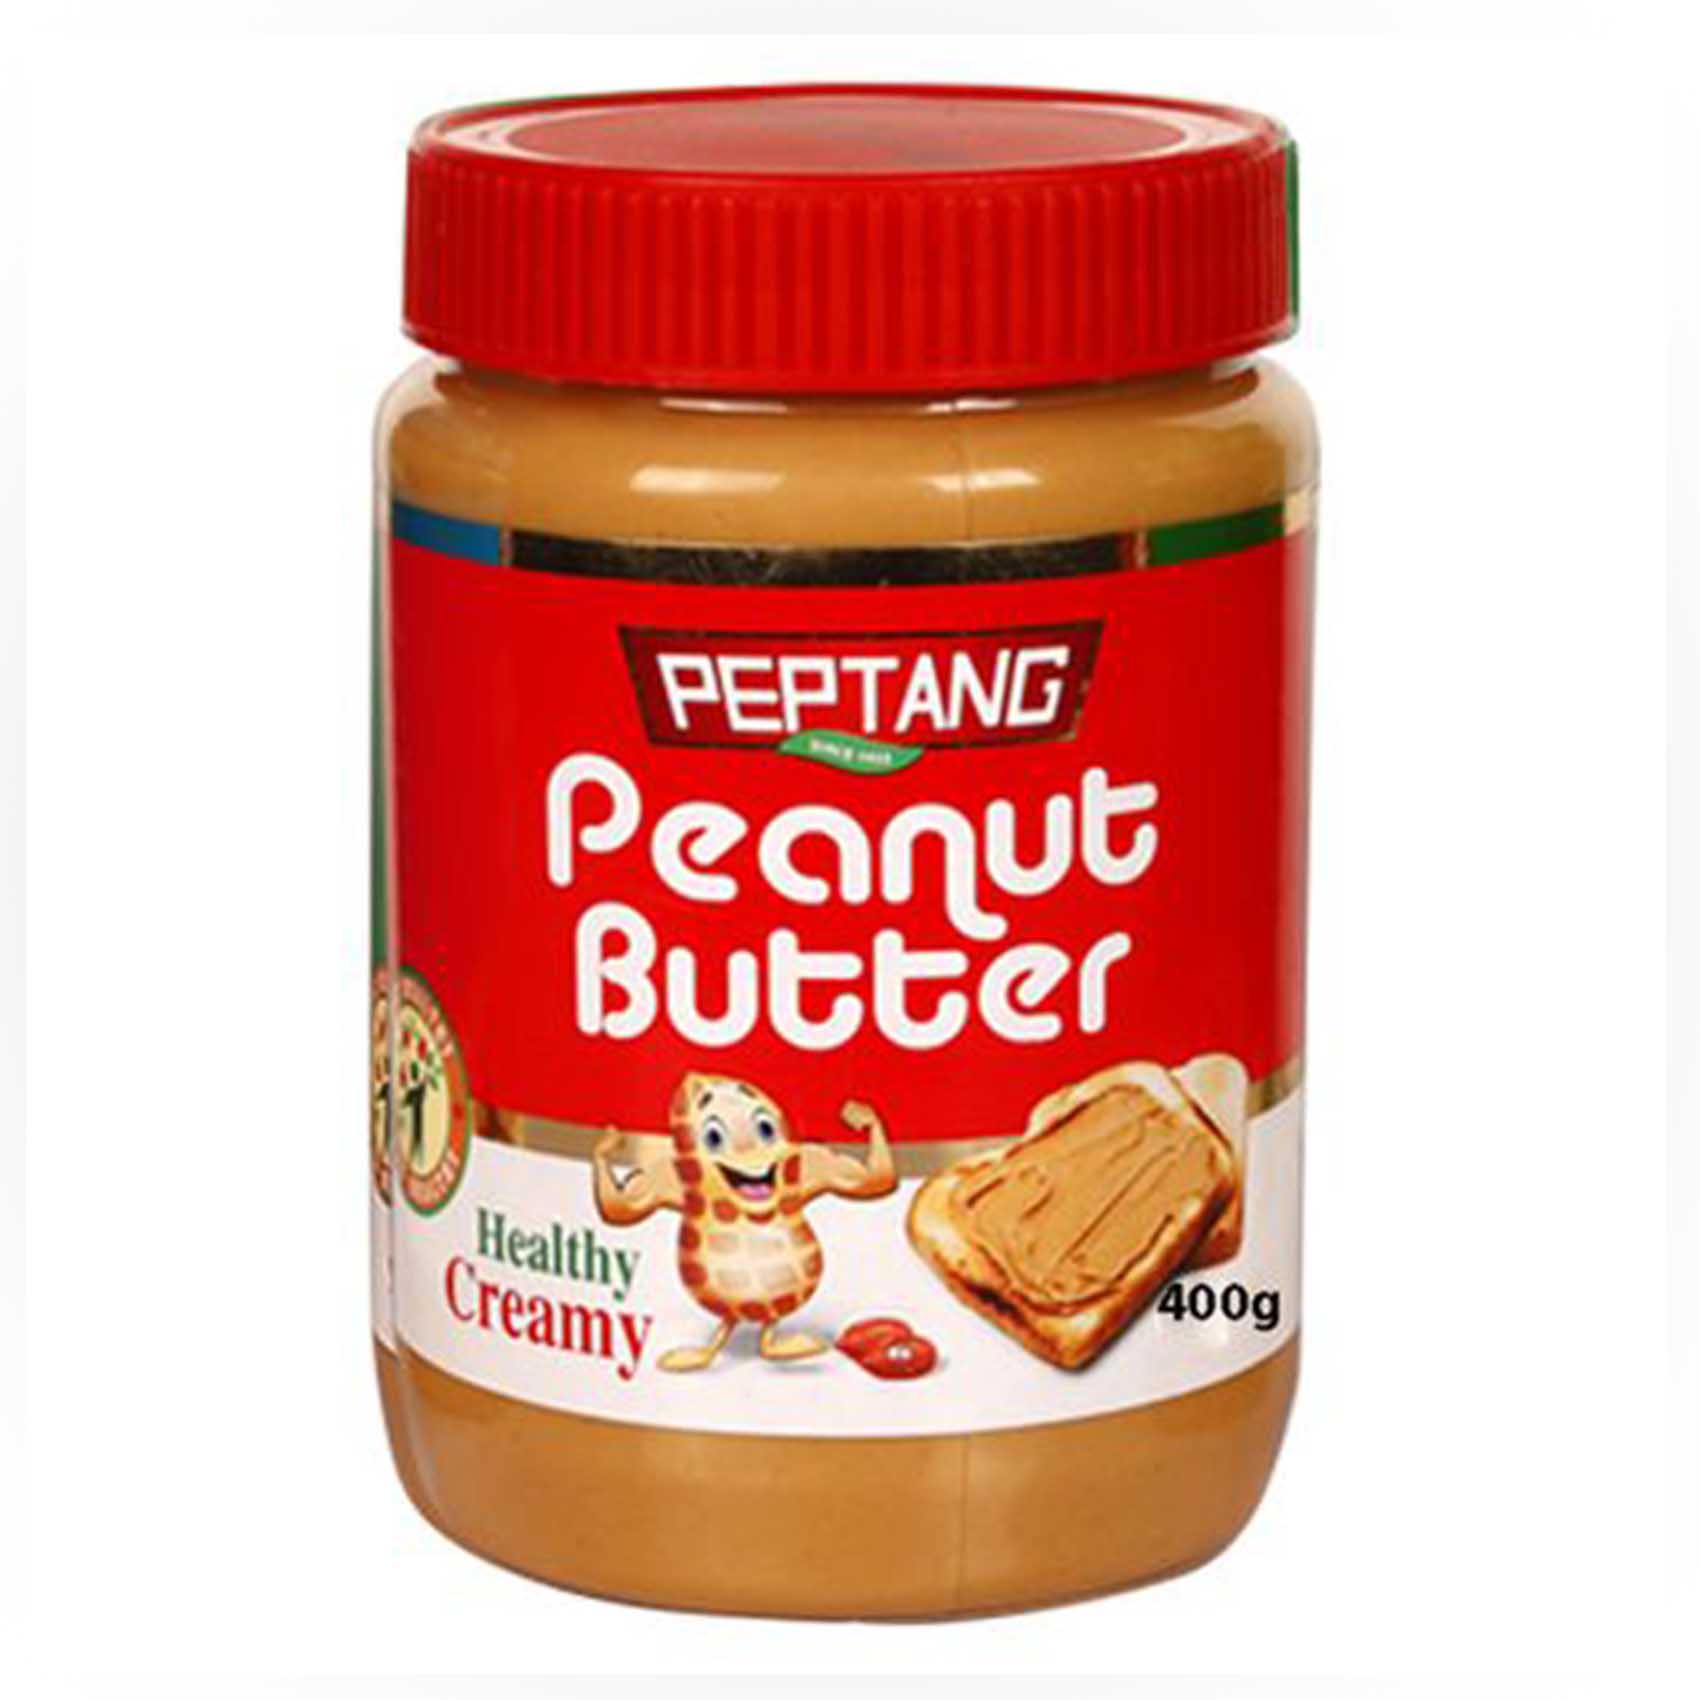 Peptang Healthy Creamy Peanut Butter 400g